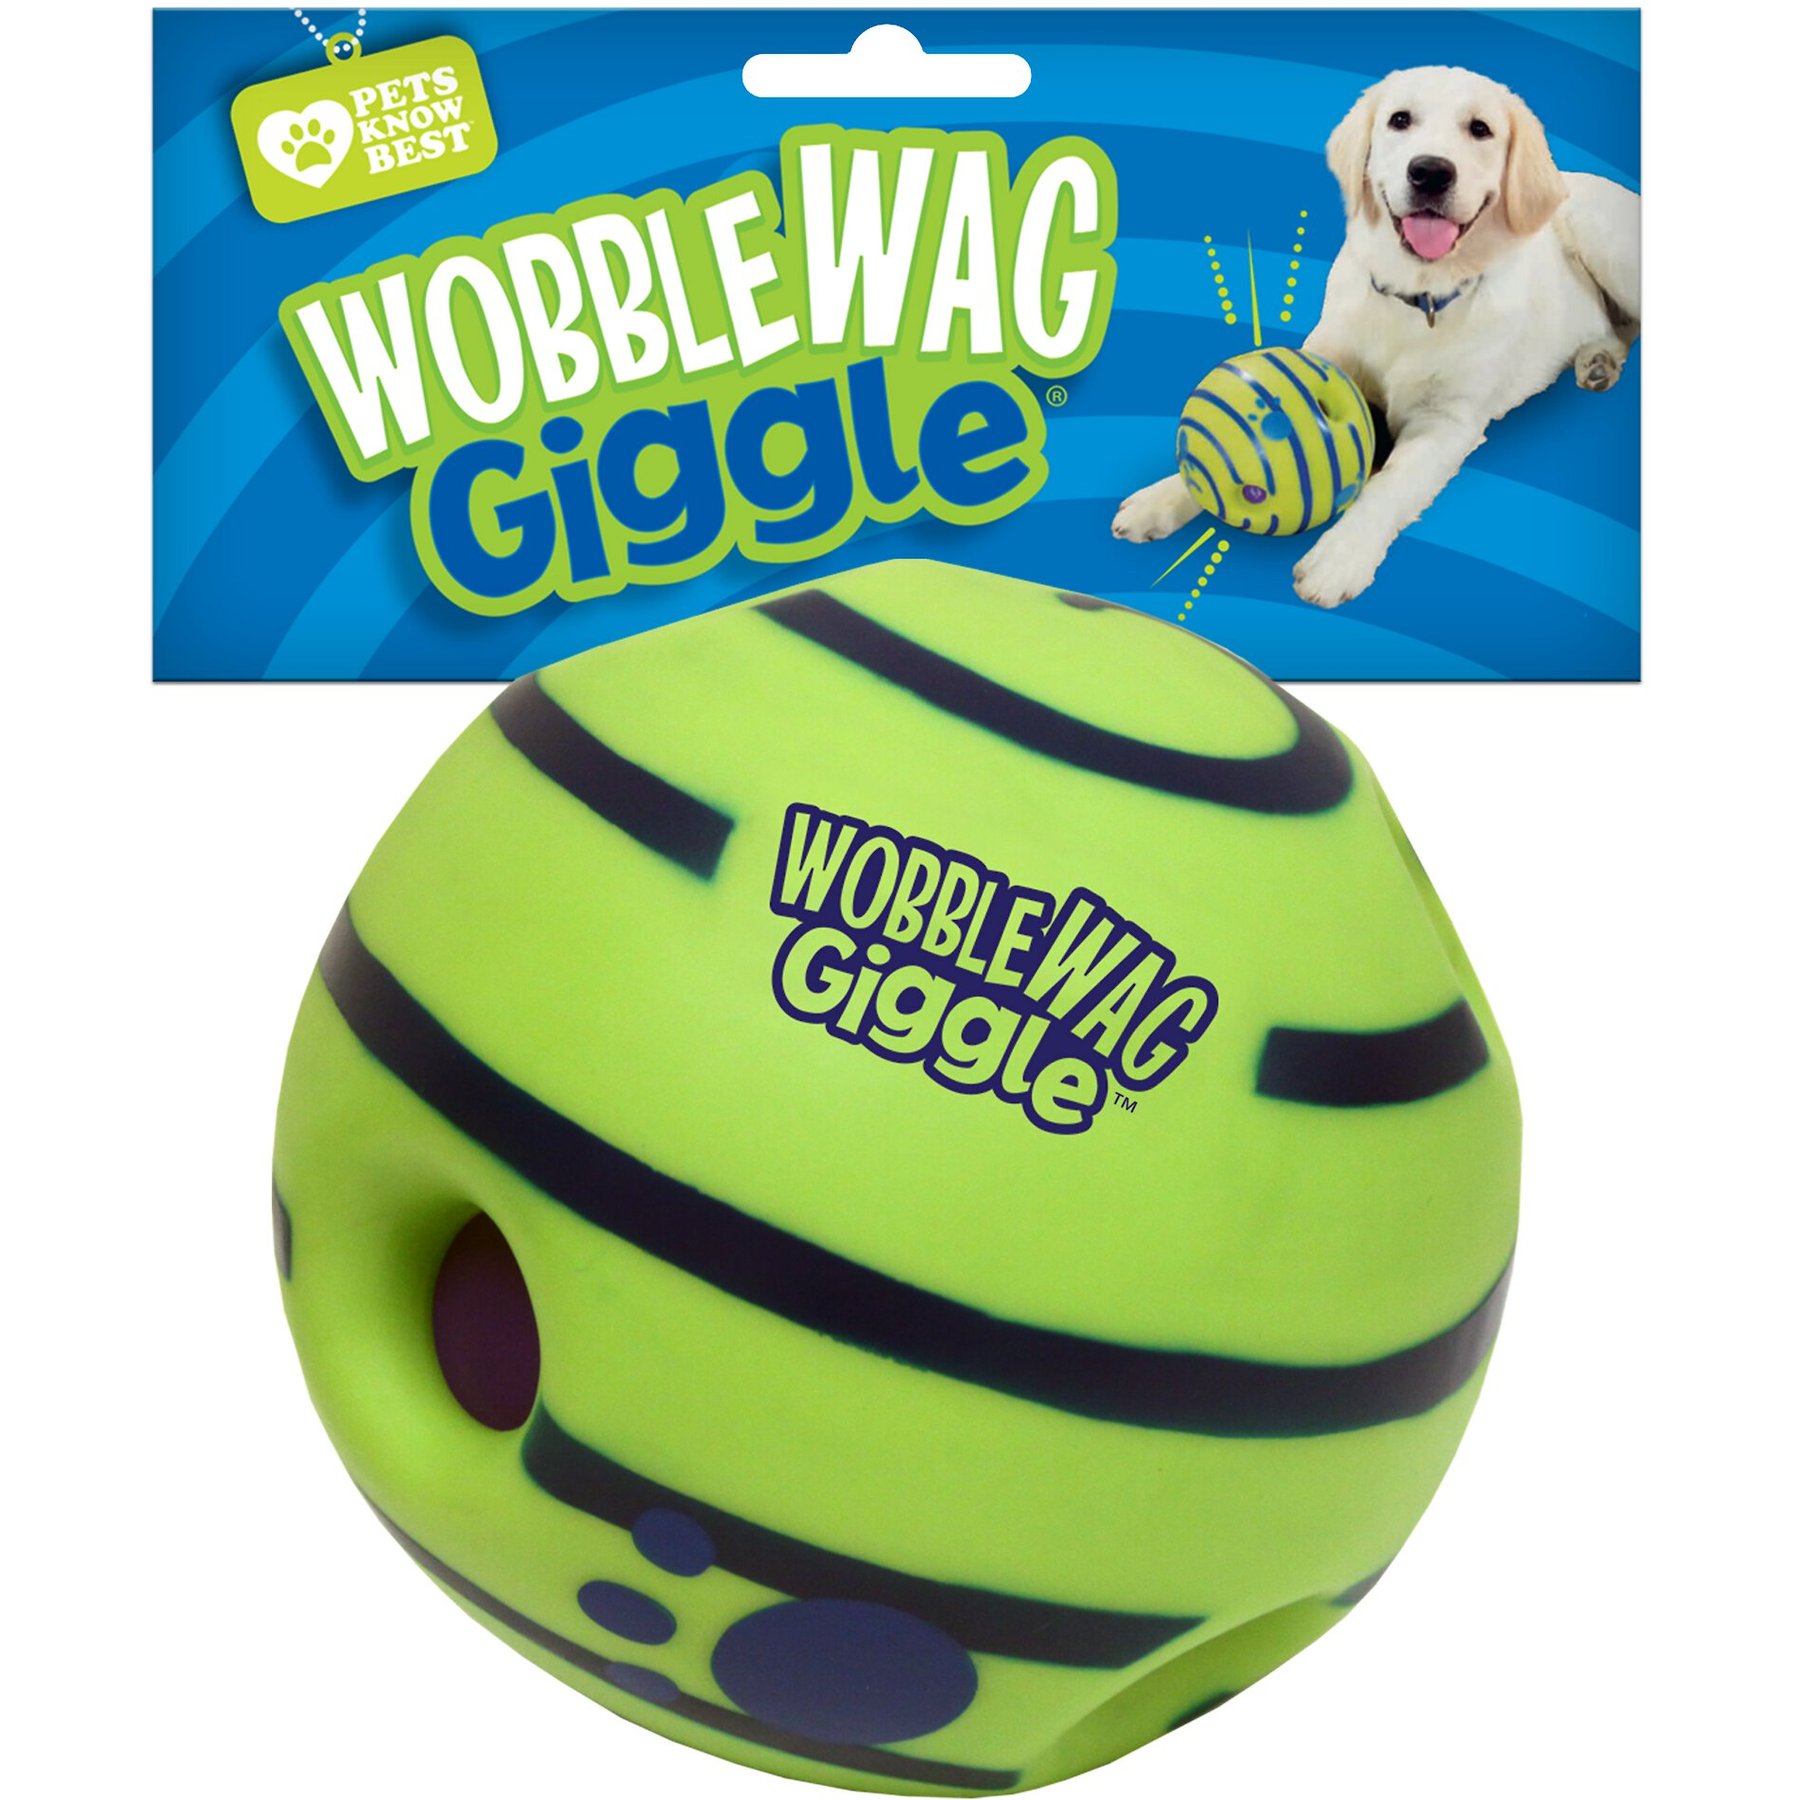 Wobble Giggle Ball Treat Toy Upgraded Material Interactive Dog